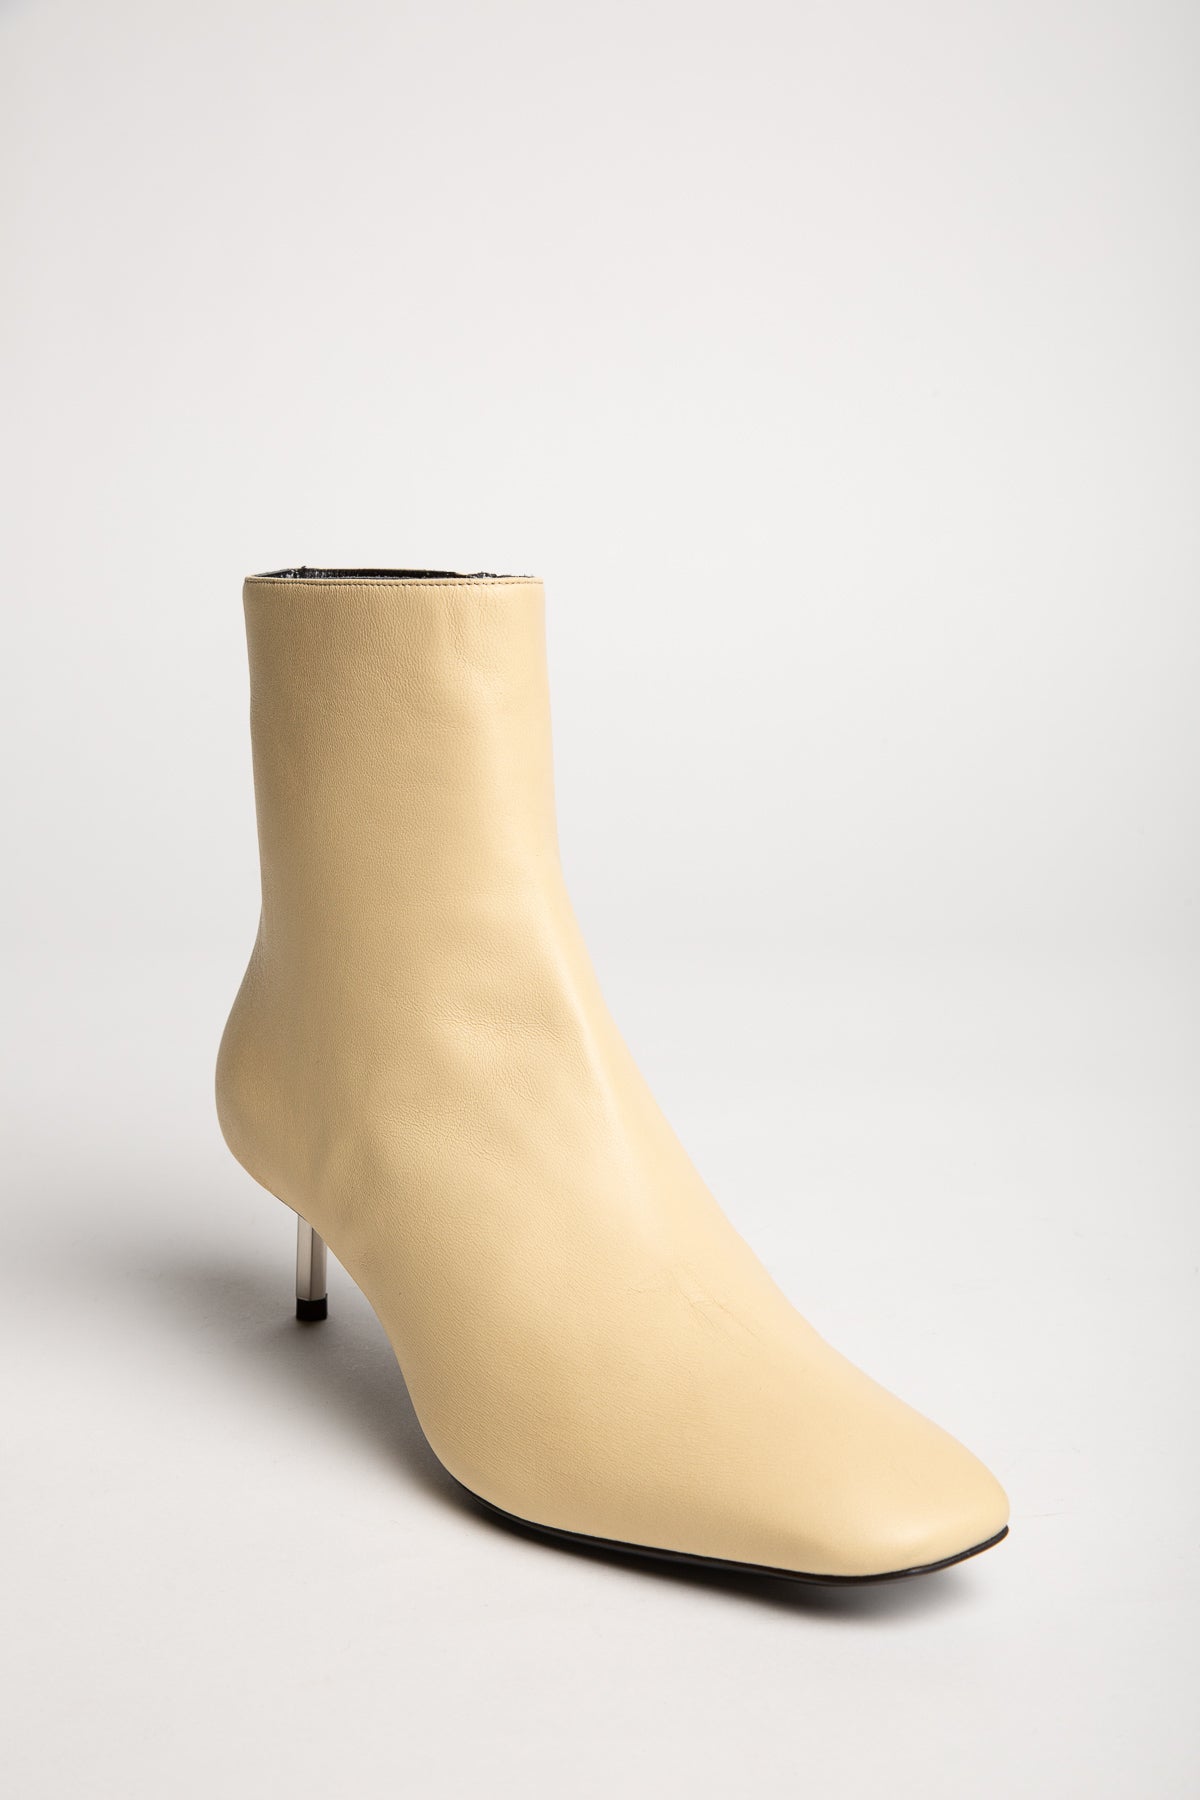 OFF-WHITE | NAPA LEATHER ANKLE BOOTS